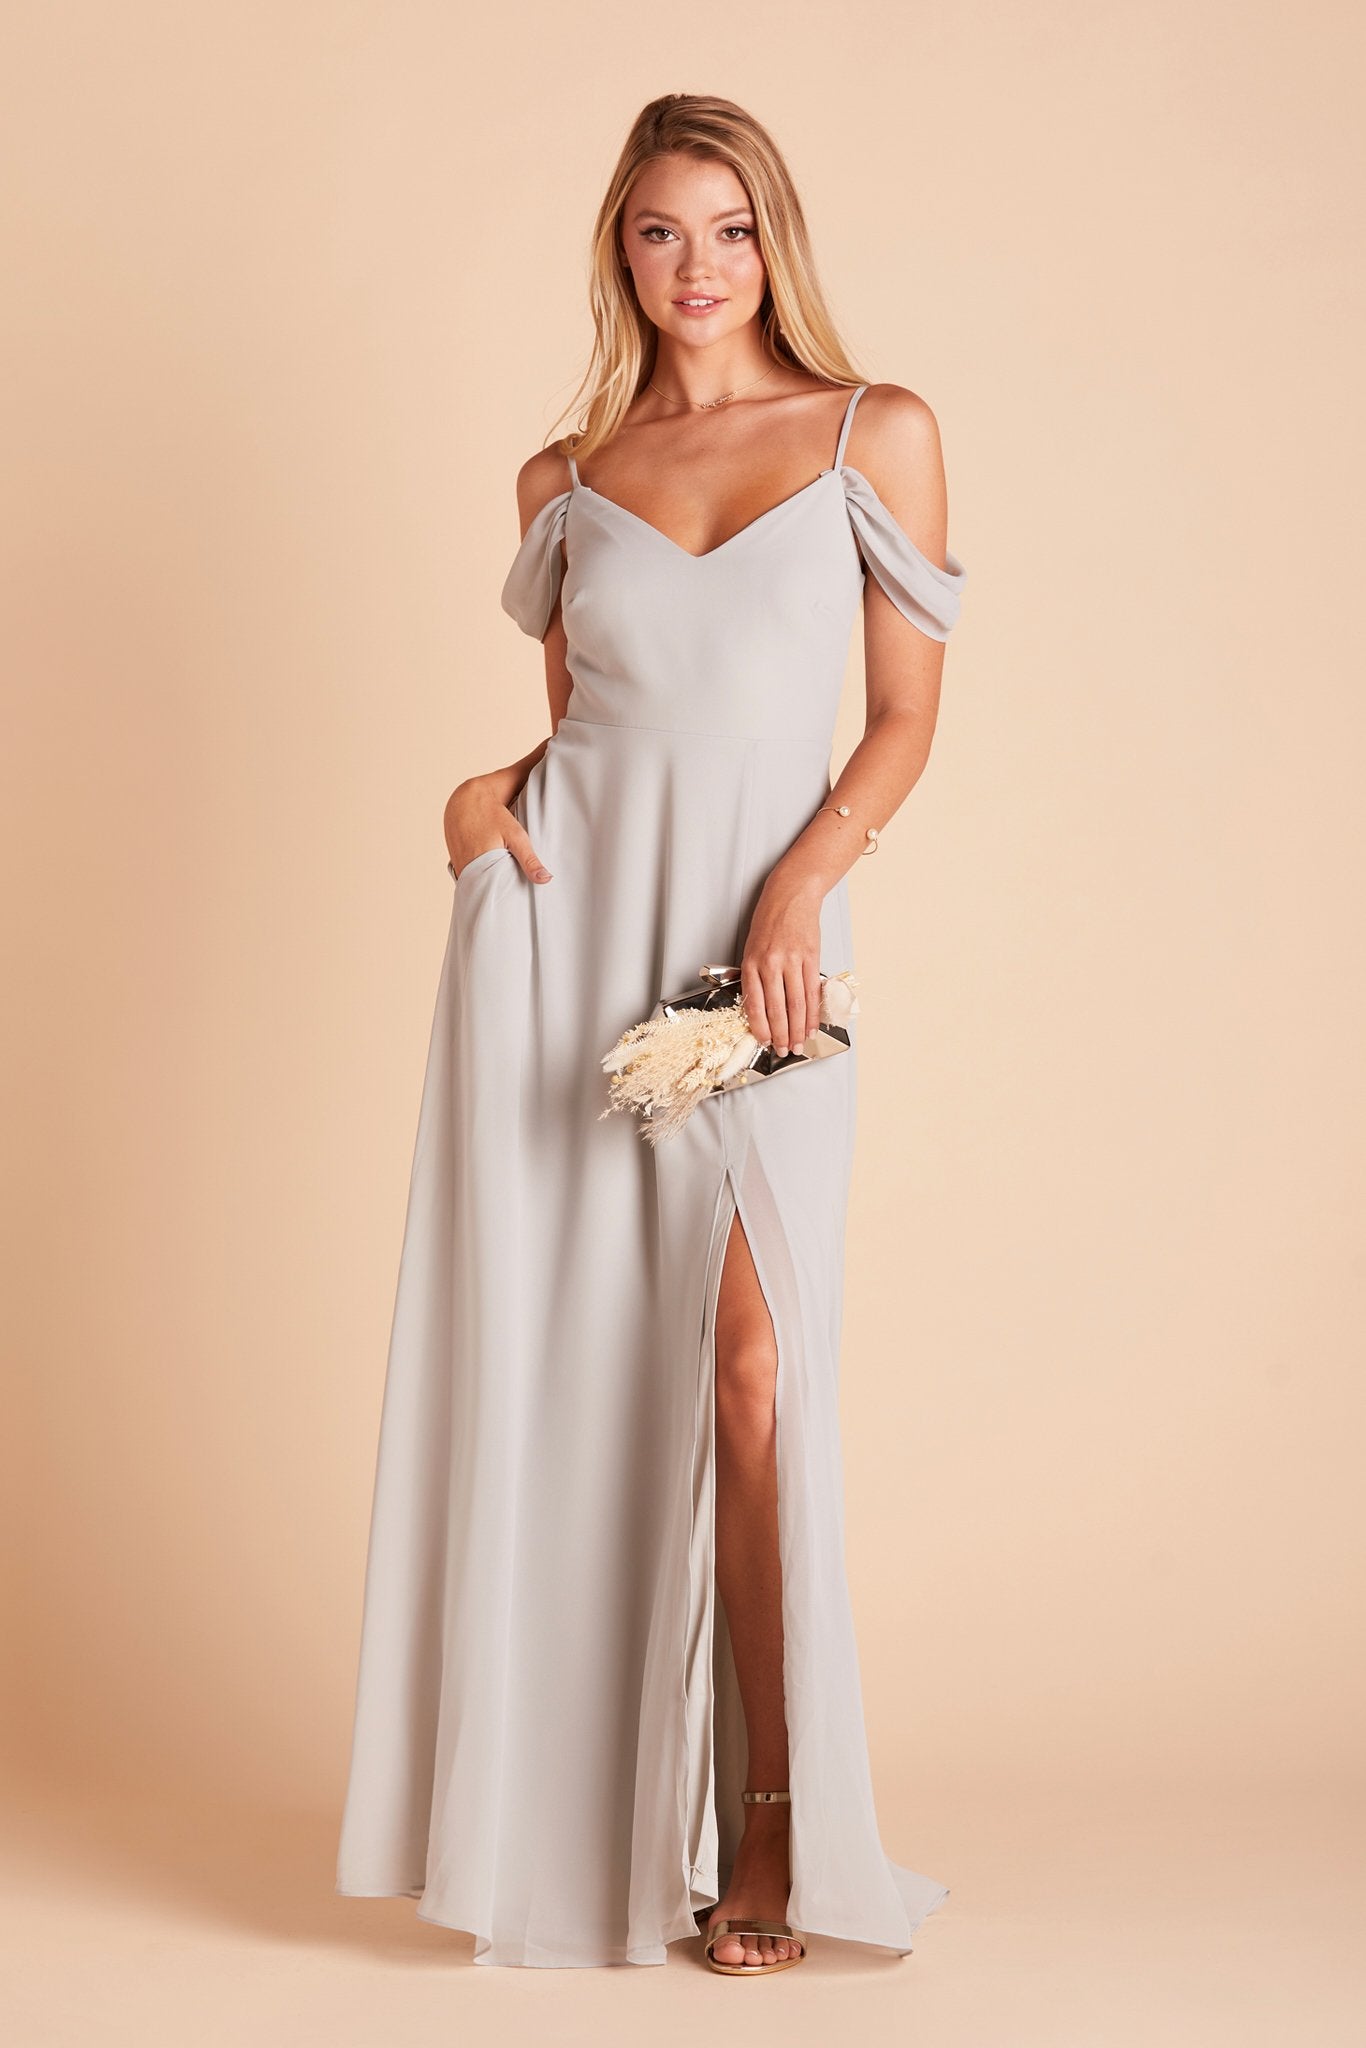 Devin convertible bridesmaid dress with slit in dove gray chiffon by Birdy Grey, front view with hand in pocket